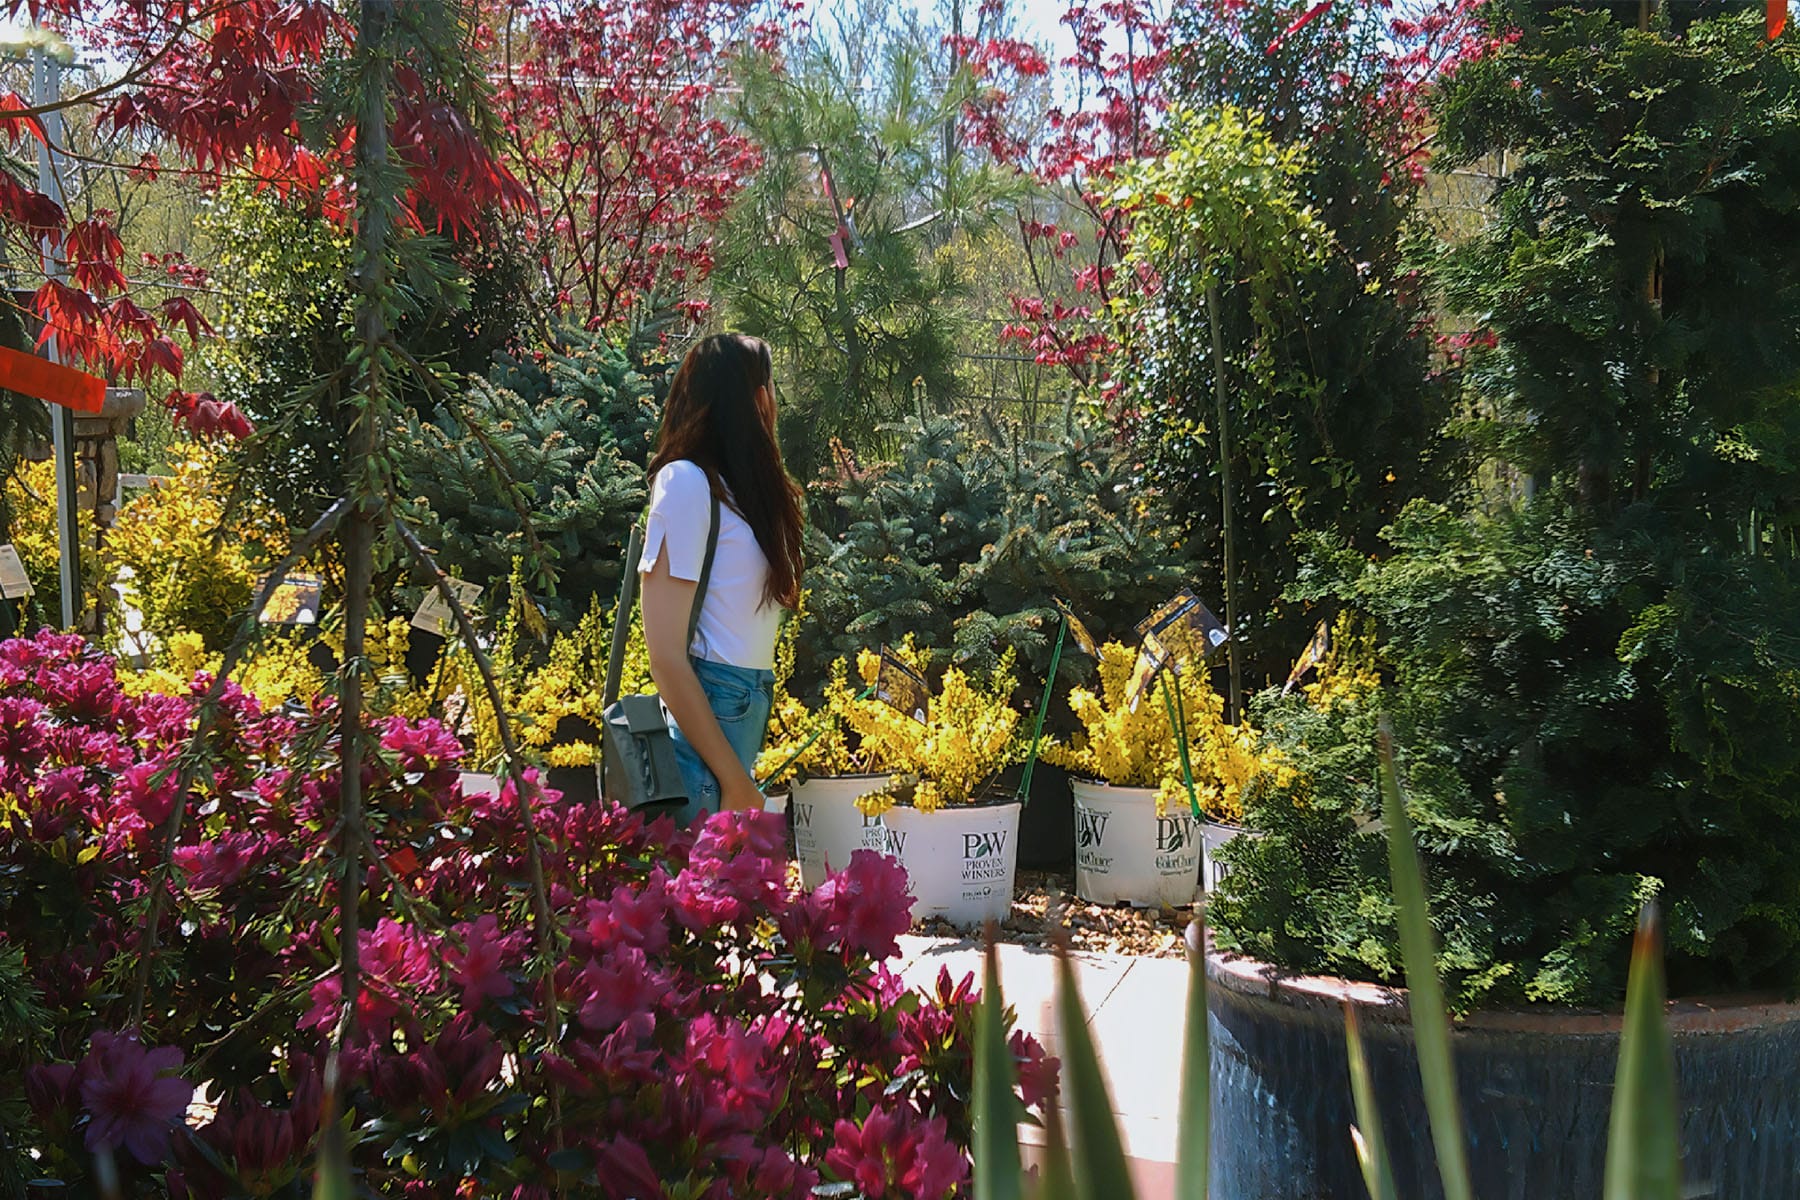 A woman with long dark hair explores a vibrant garden center, surrounded by lush plants including vivid pink azaleas and yellow forsythias, all under the dappled sunlight of early spring. The scene is enriched with various shades of green from the dense foliage.